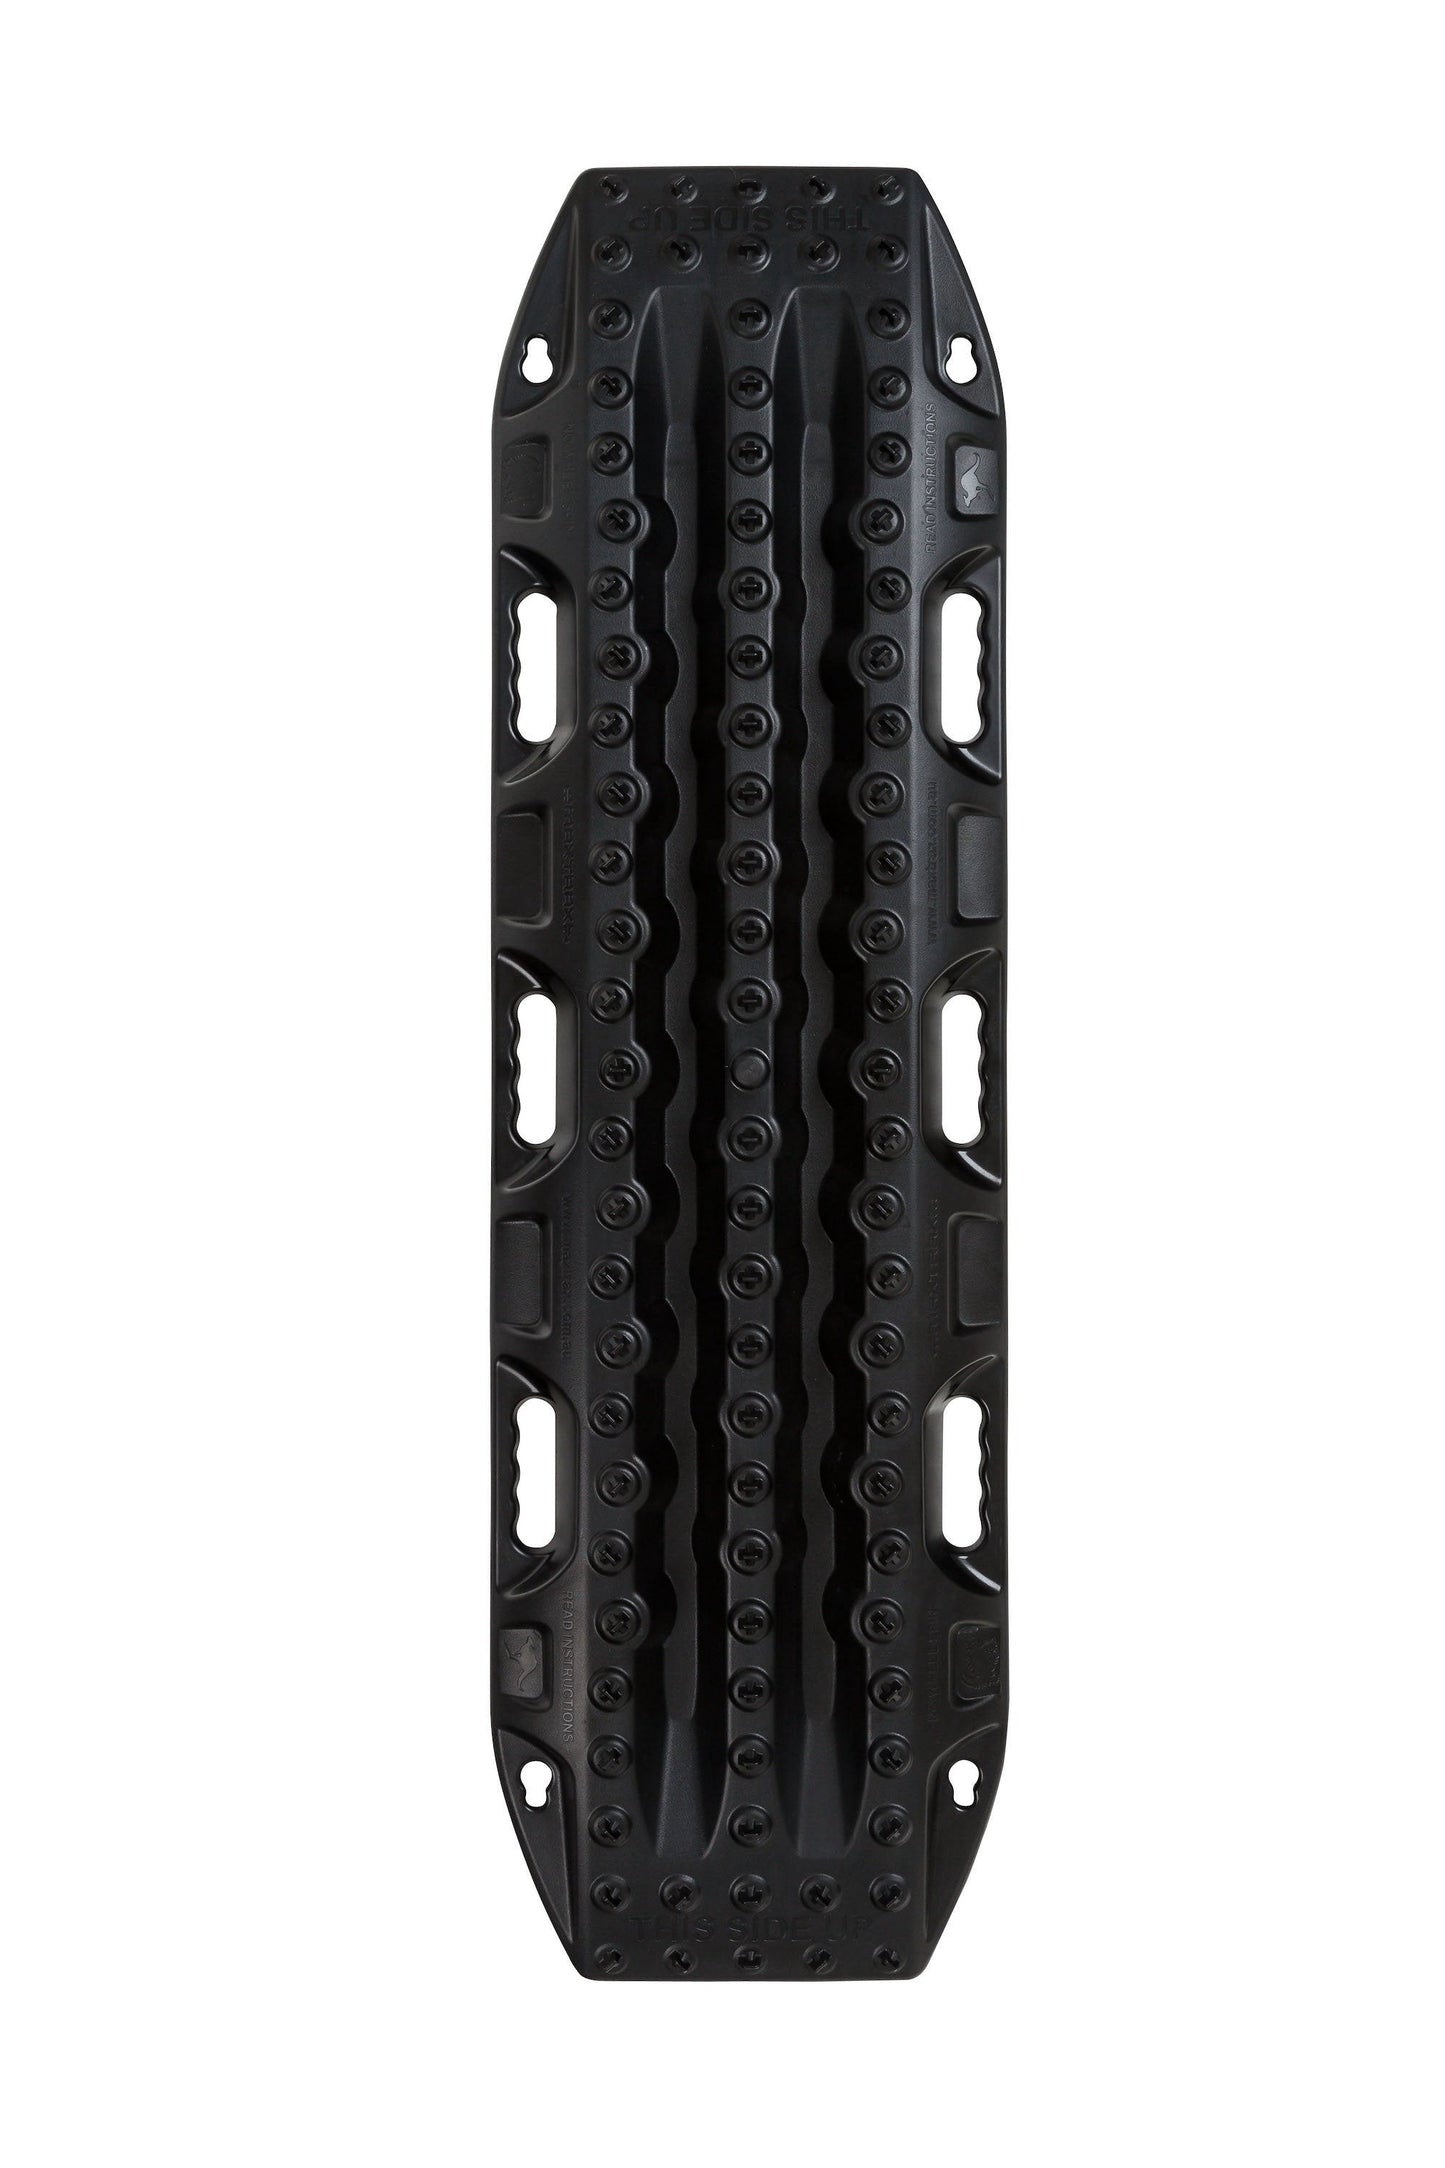 MAXTRAX MKII Black Recovery Boards